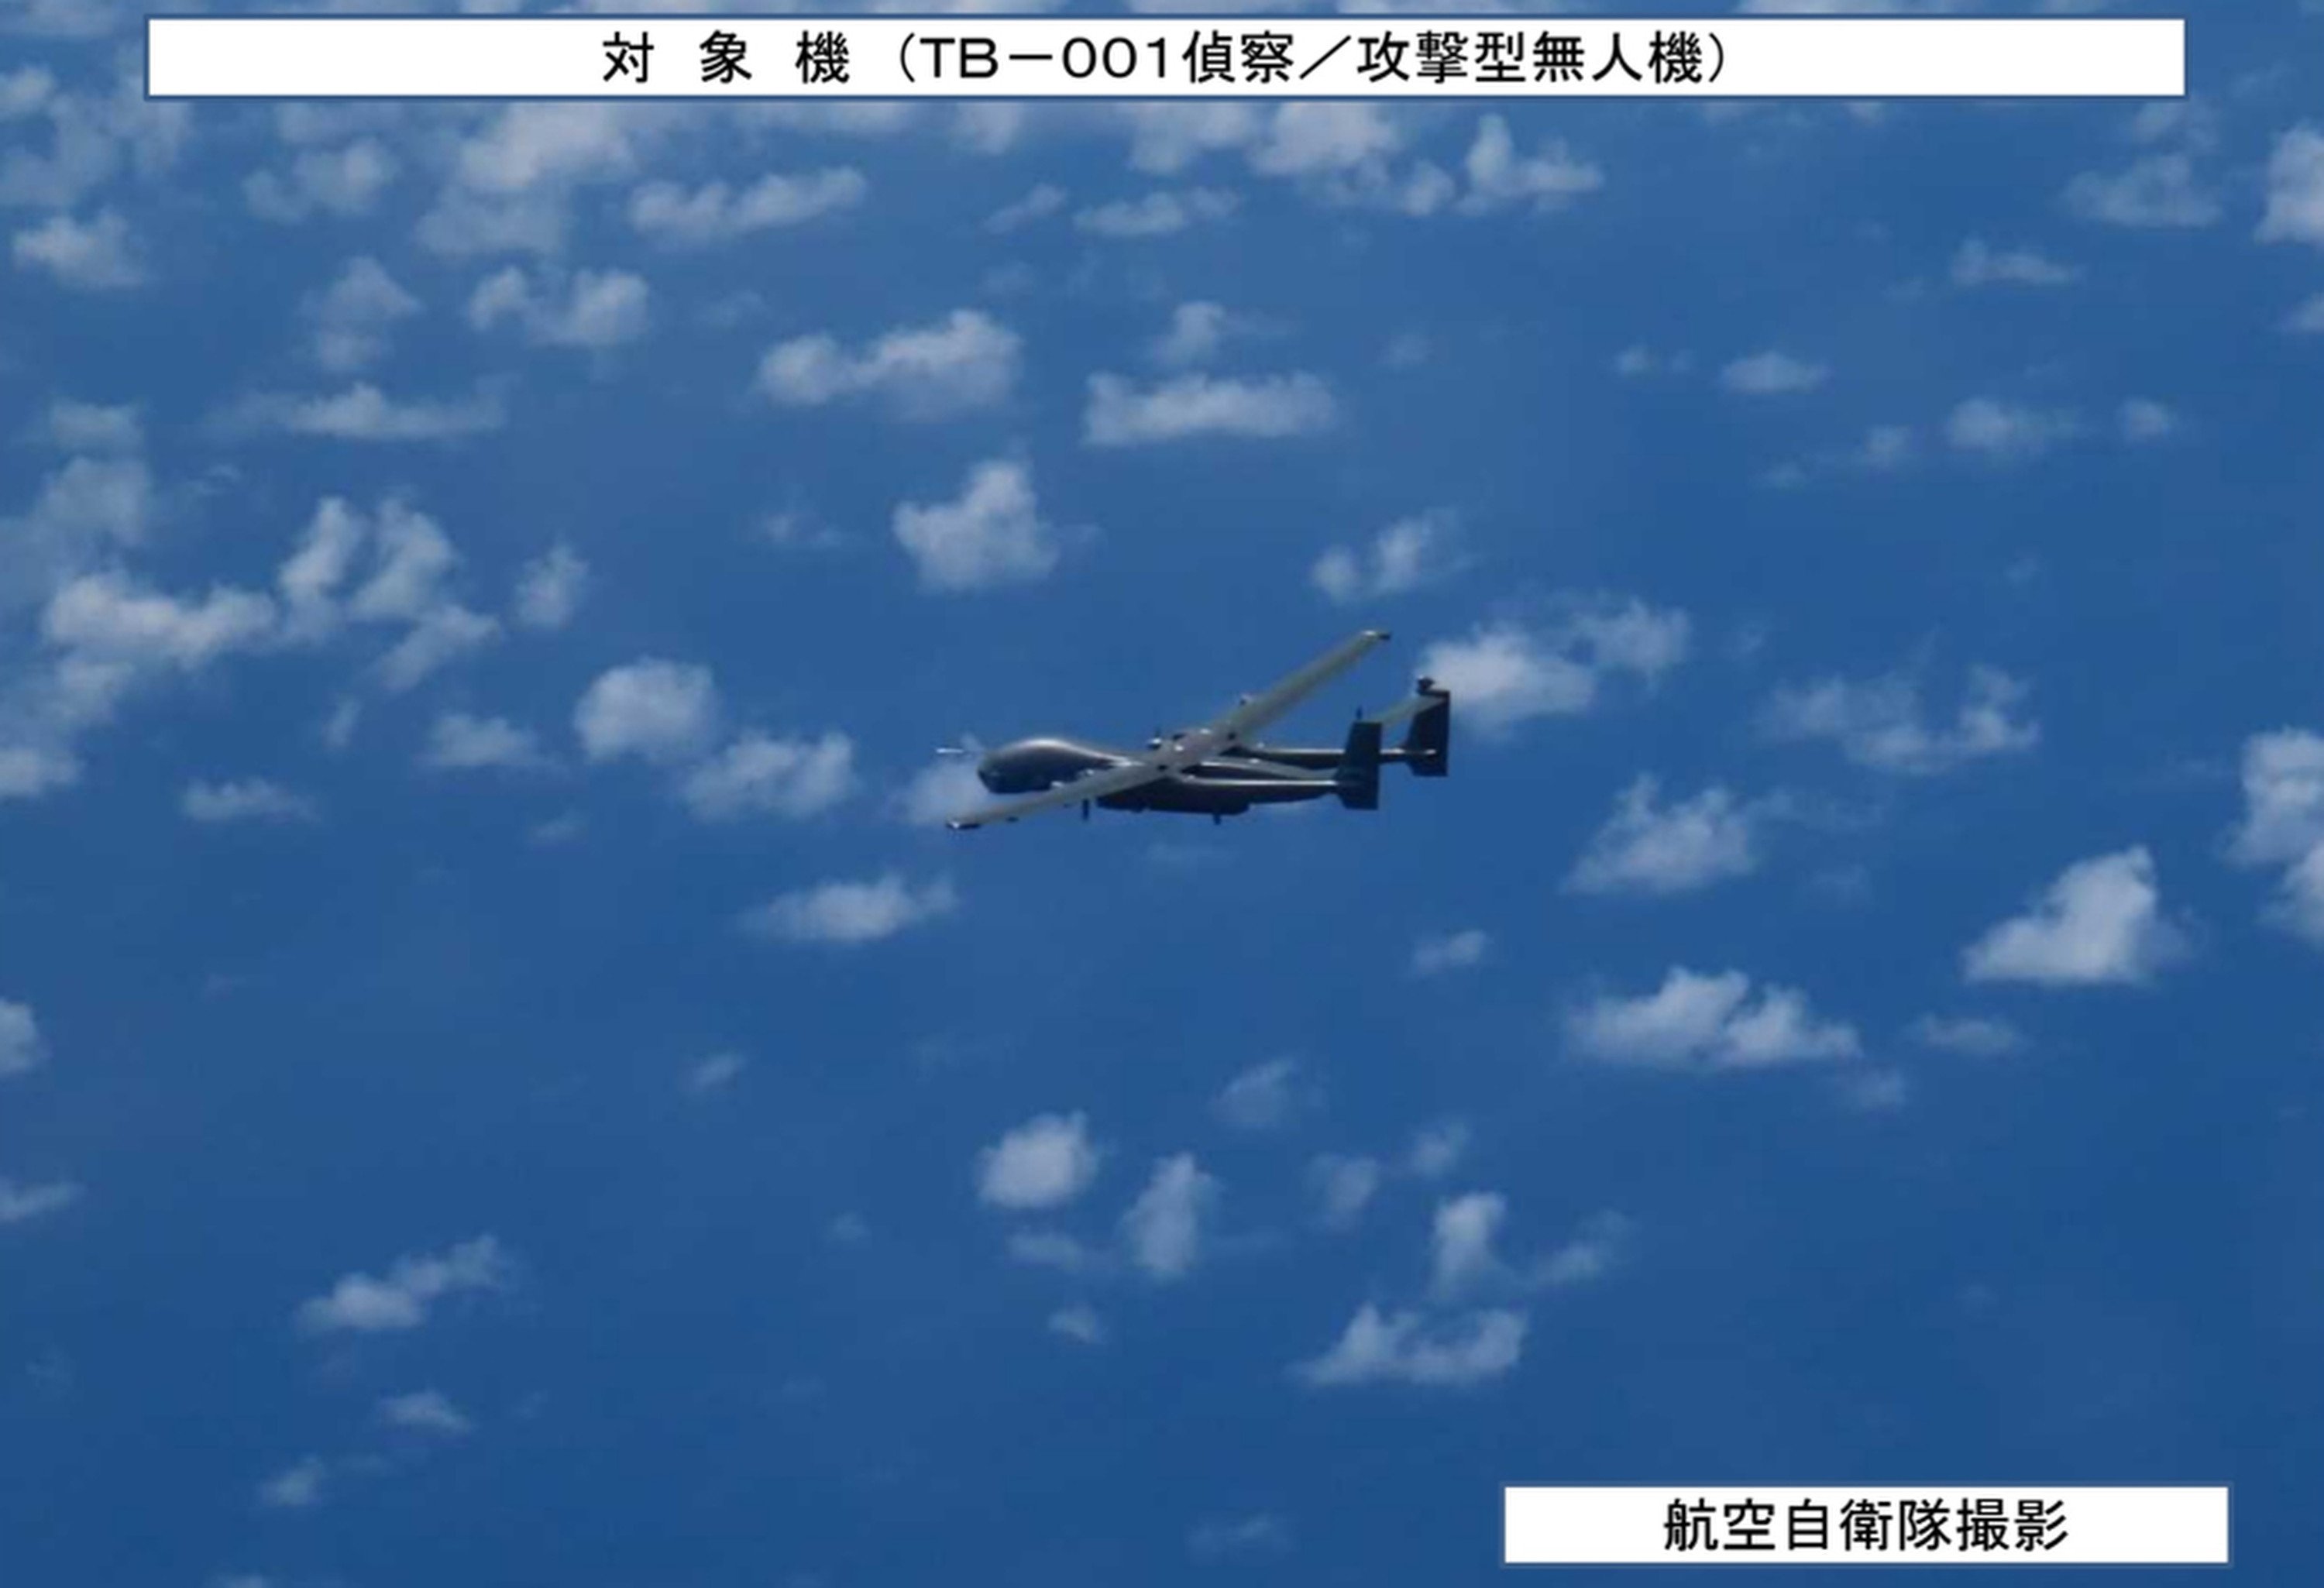 The PLA’s TB-001 drone, nicknamed the “Twin-Tailed Scorpion”, can carry bombs and missiles. Photo: Handout